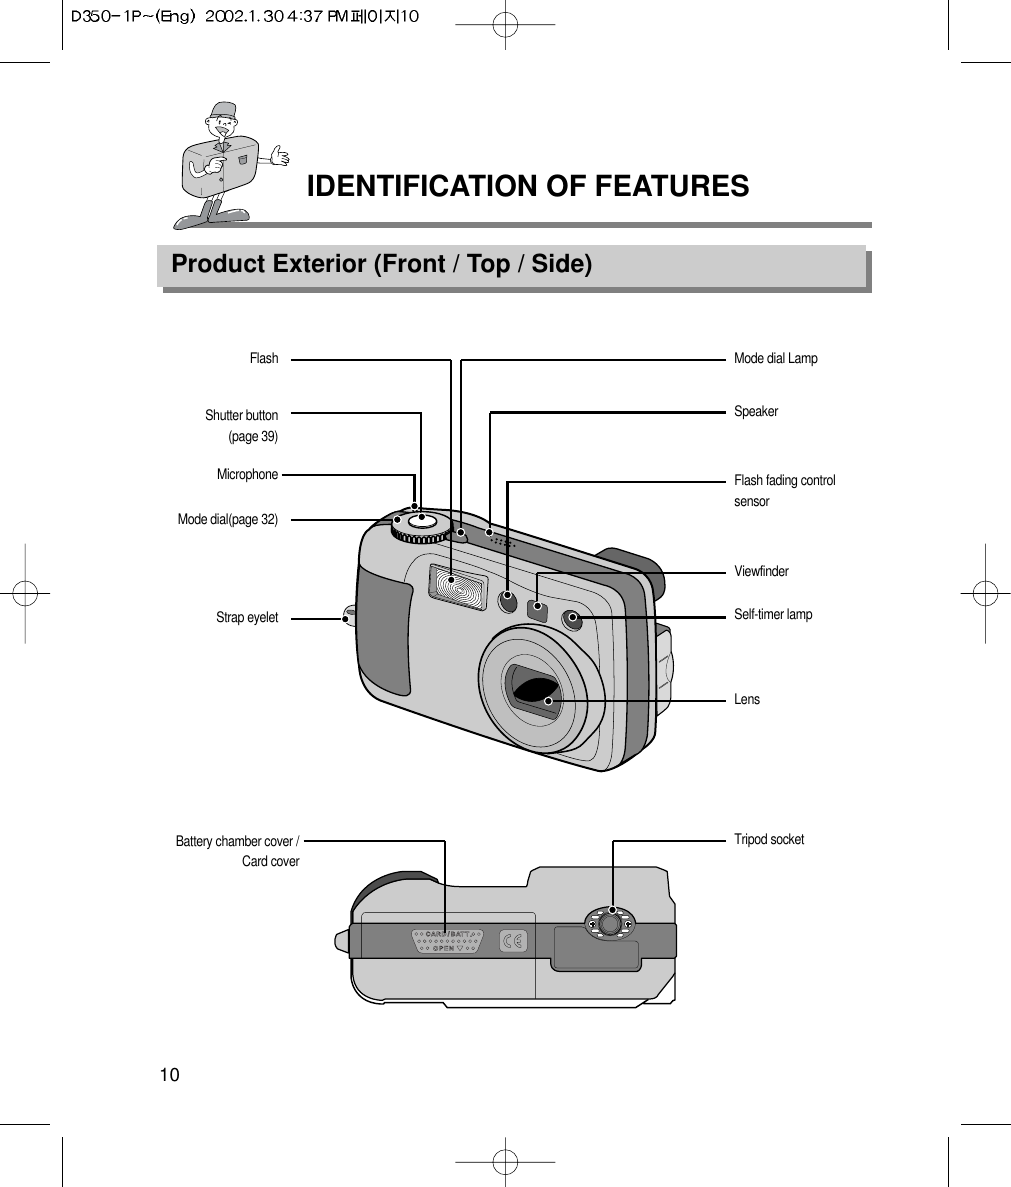 IDENTIFICATION OF FEATURESProduct Exterior (Front / Top / Side)10FlashShutter button(page 39)MicrophoneMode dial(page 32)Strap eyeletLensSelf-timer lampViewfinderFlash fading controlsensorSpeakerMode dial LampBattery chamber cover /Card coverTripod socket